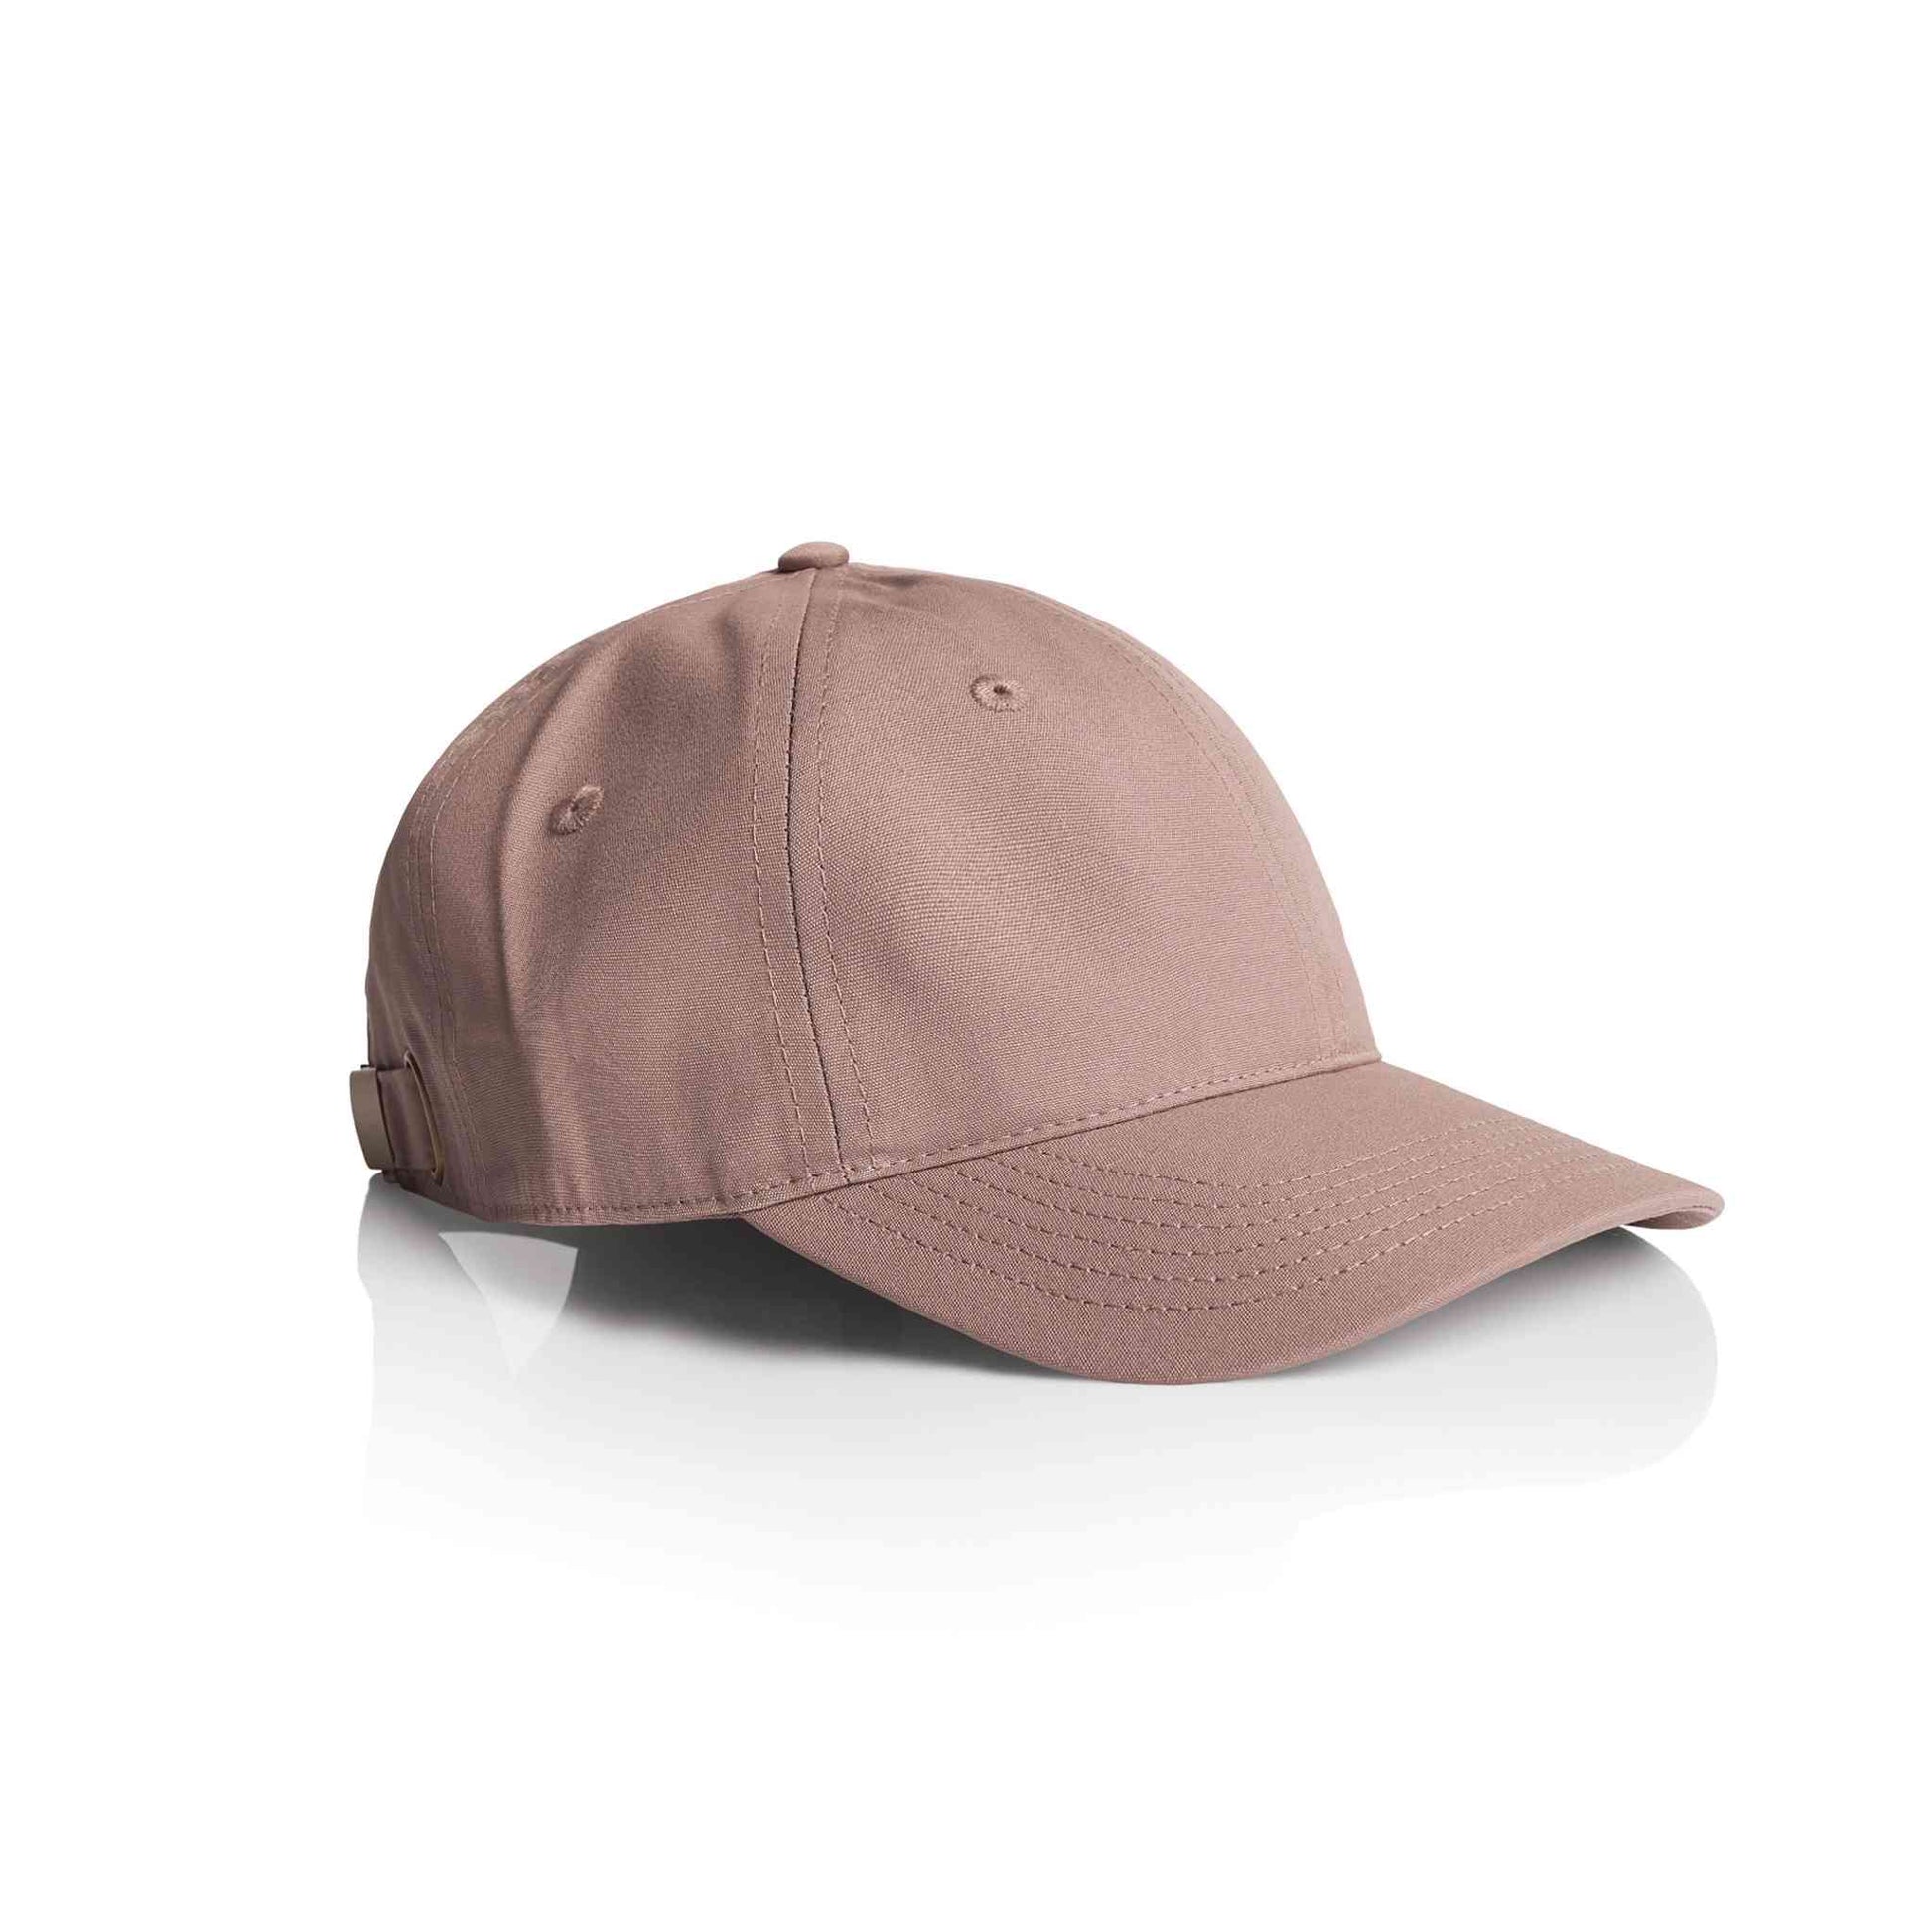 AS Colour 1130 Access 6 panel cap in hazy pink colour, side view